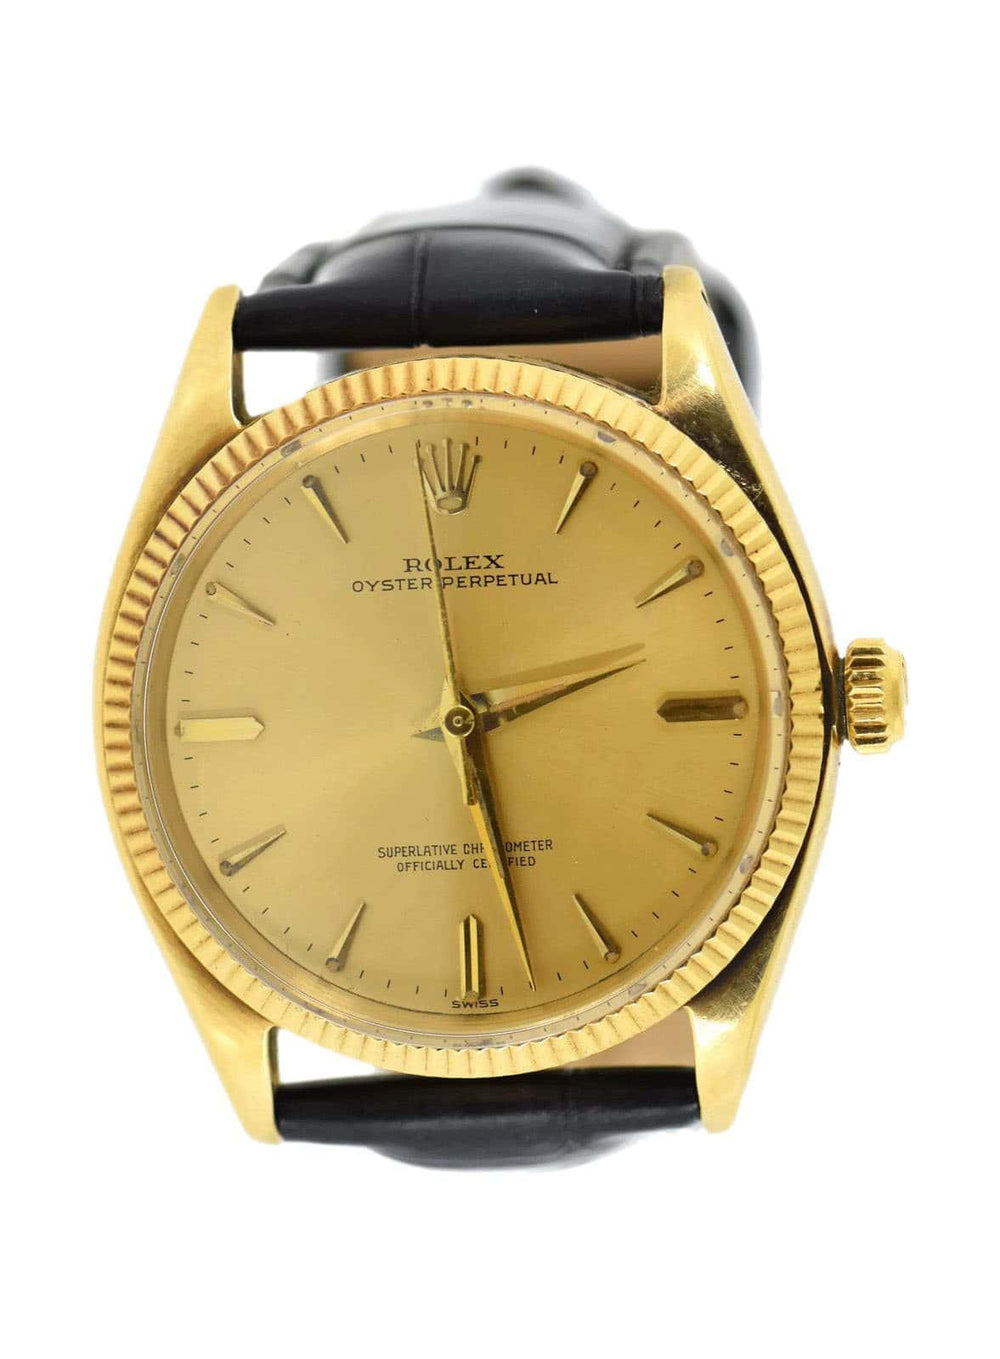 Rolex Oyster Perpetual 1005 4